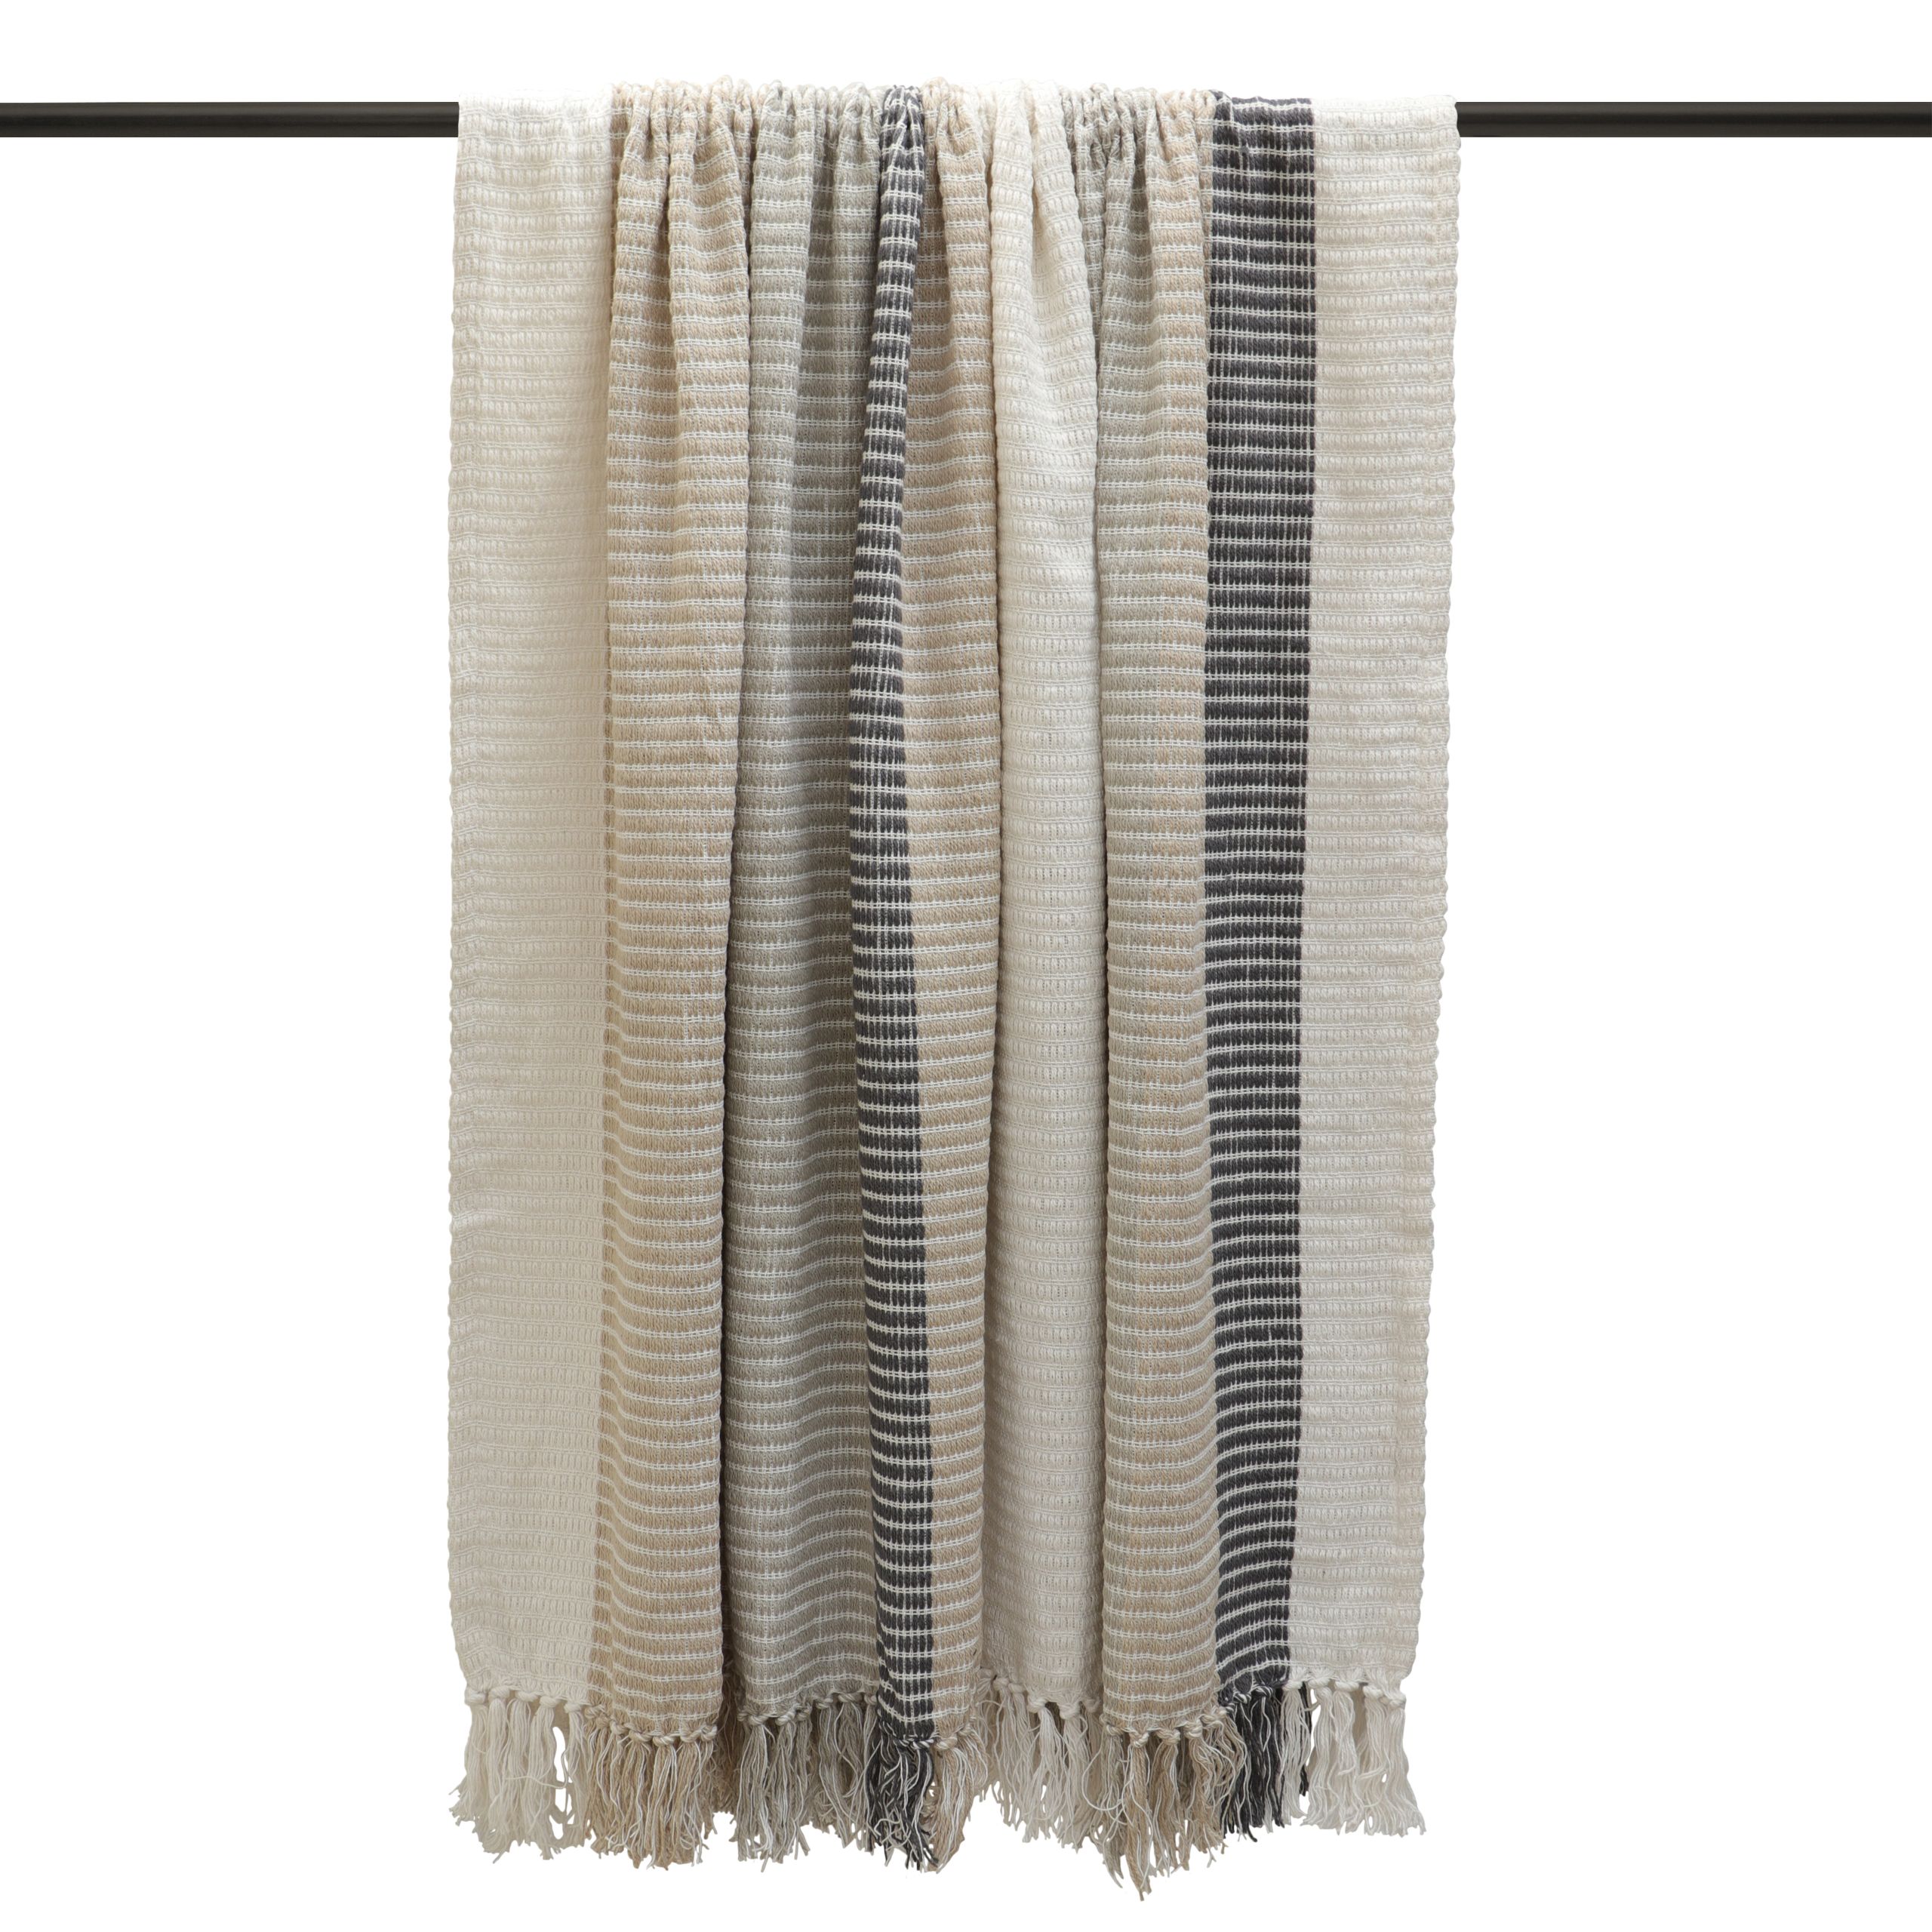 Our Tulsa cotton throw features bands of contrasting woven colour in warm summer tones, and finished with fringed tassel edges. Perfect for cool summer evenings, or for layering up and adding texture to your home.